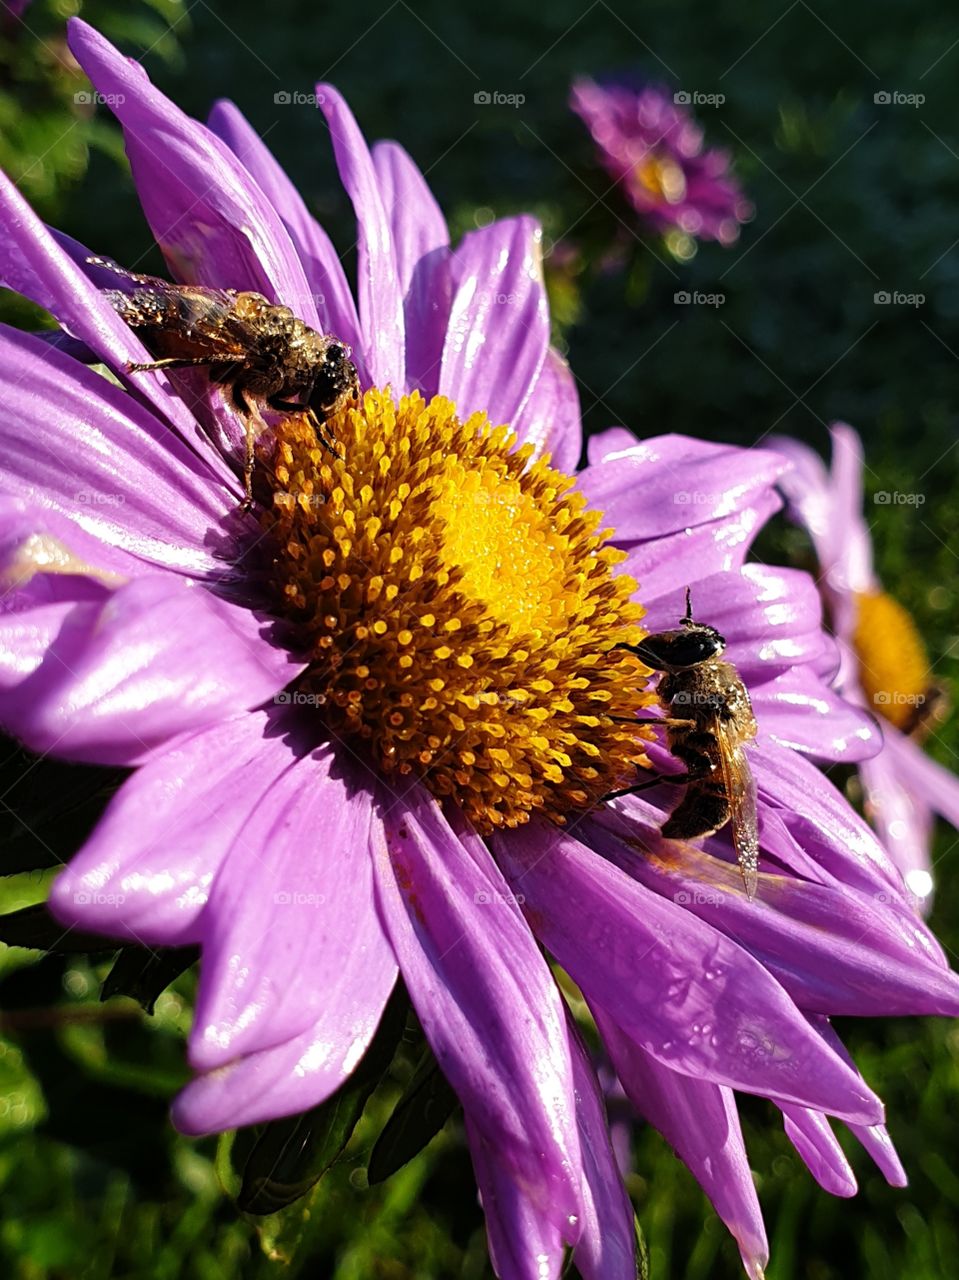 Insects on a purple flower in the morningsun.